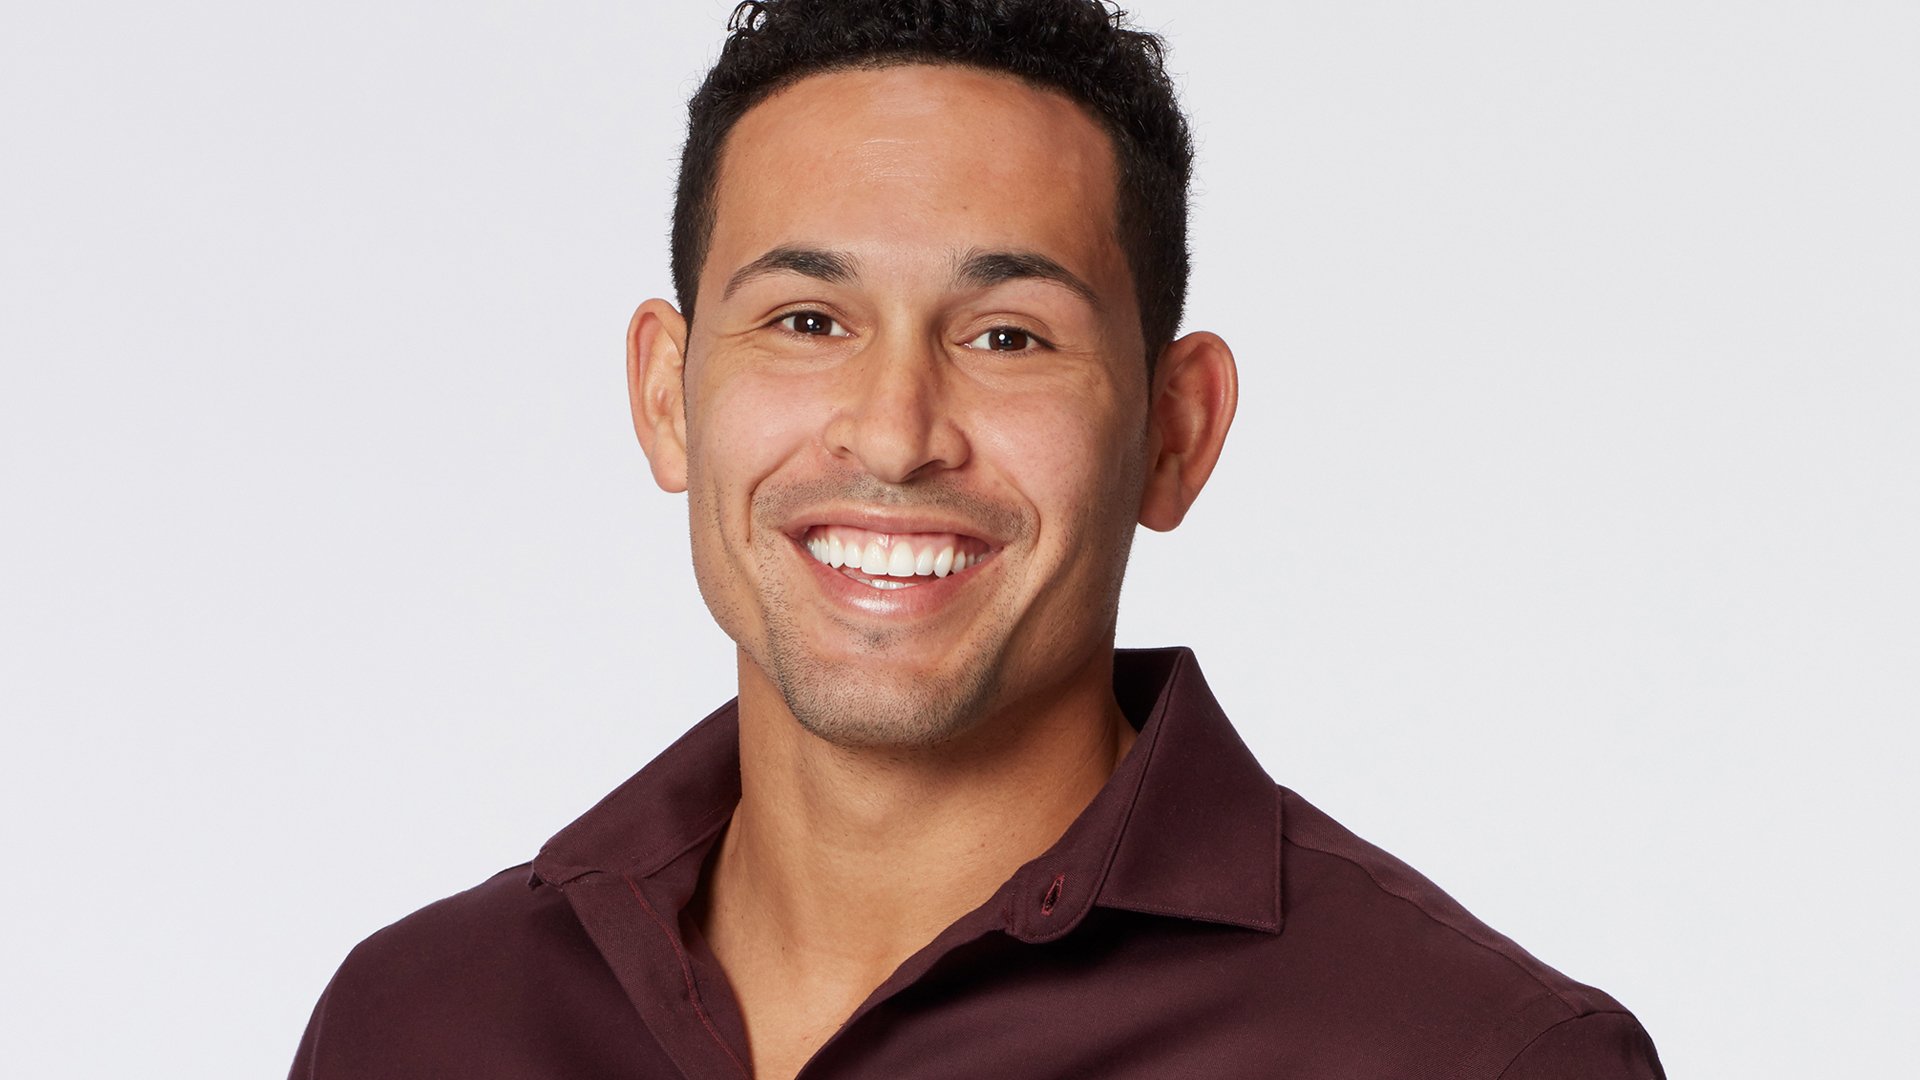 Headshot of Thomas Jacobs from ‘The Bachelorette’ and ‘Bachelor in Paradise’